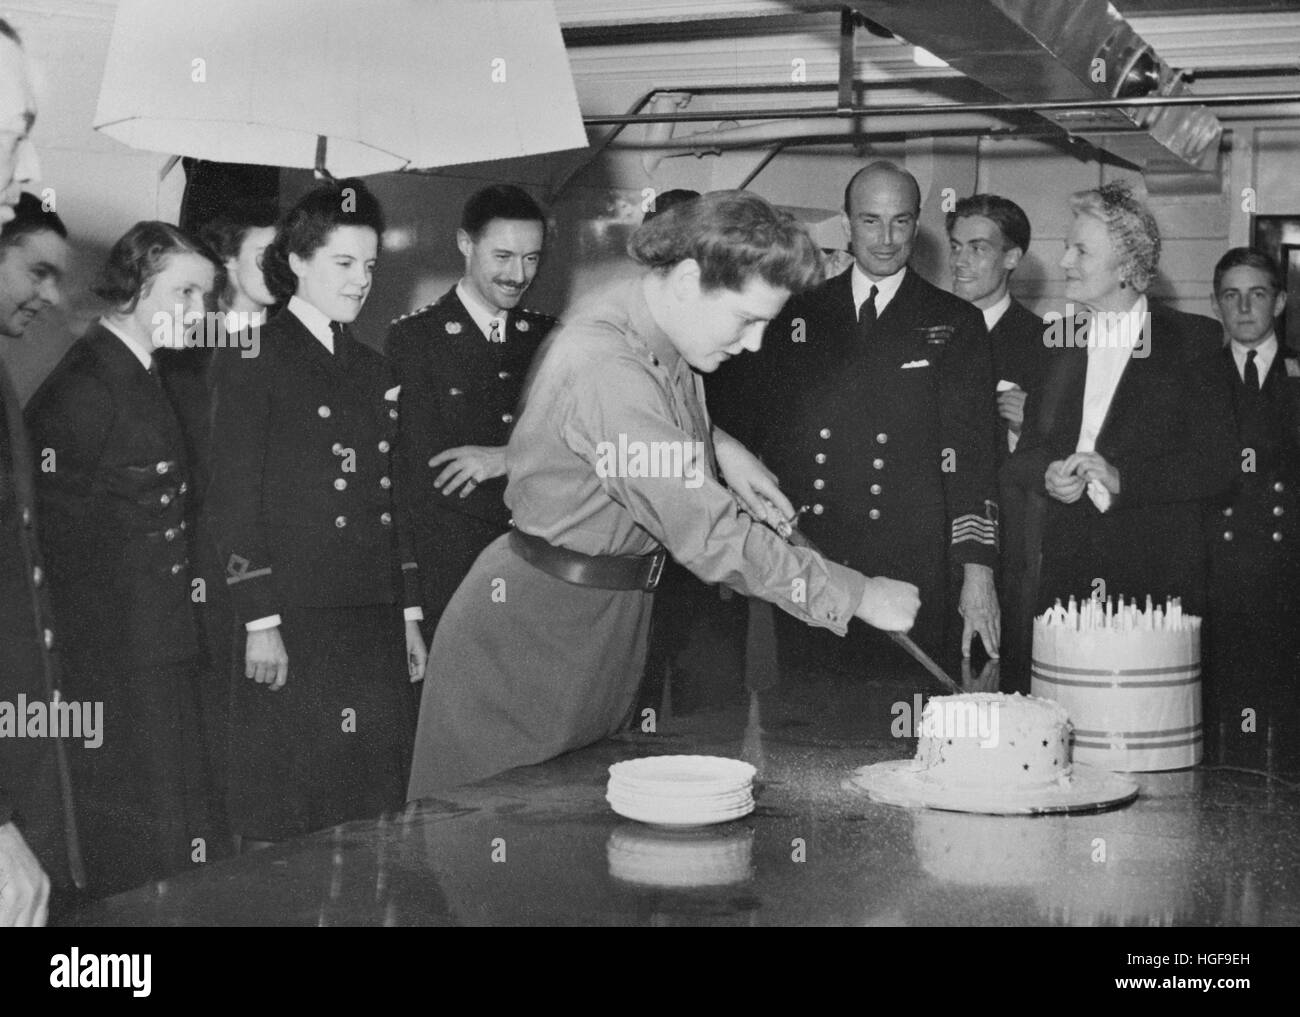 Mary, daughter of Winston Churchill, cuts cake celebrating her 21st birthday. Her mother, Clementine standing on her left.  HMS RENOWN. Sept 15th 1943 Stock Photo